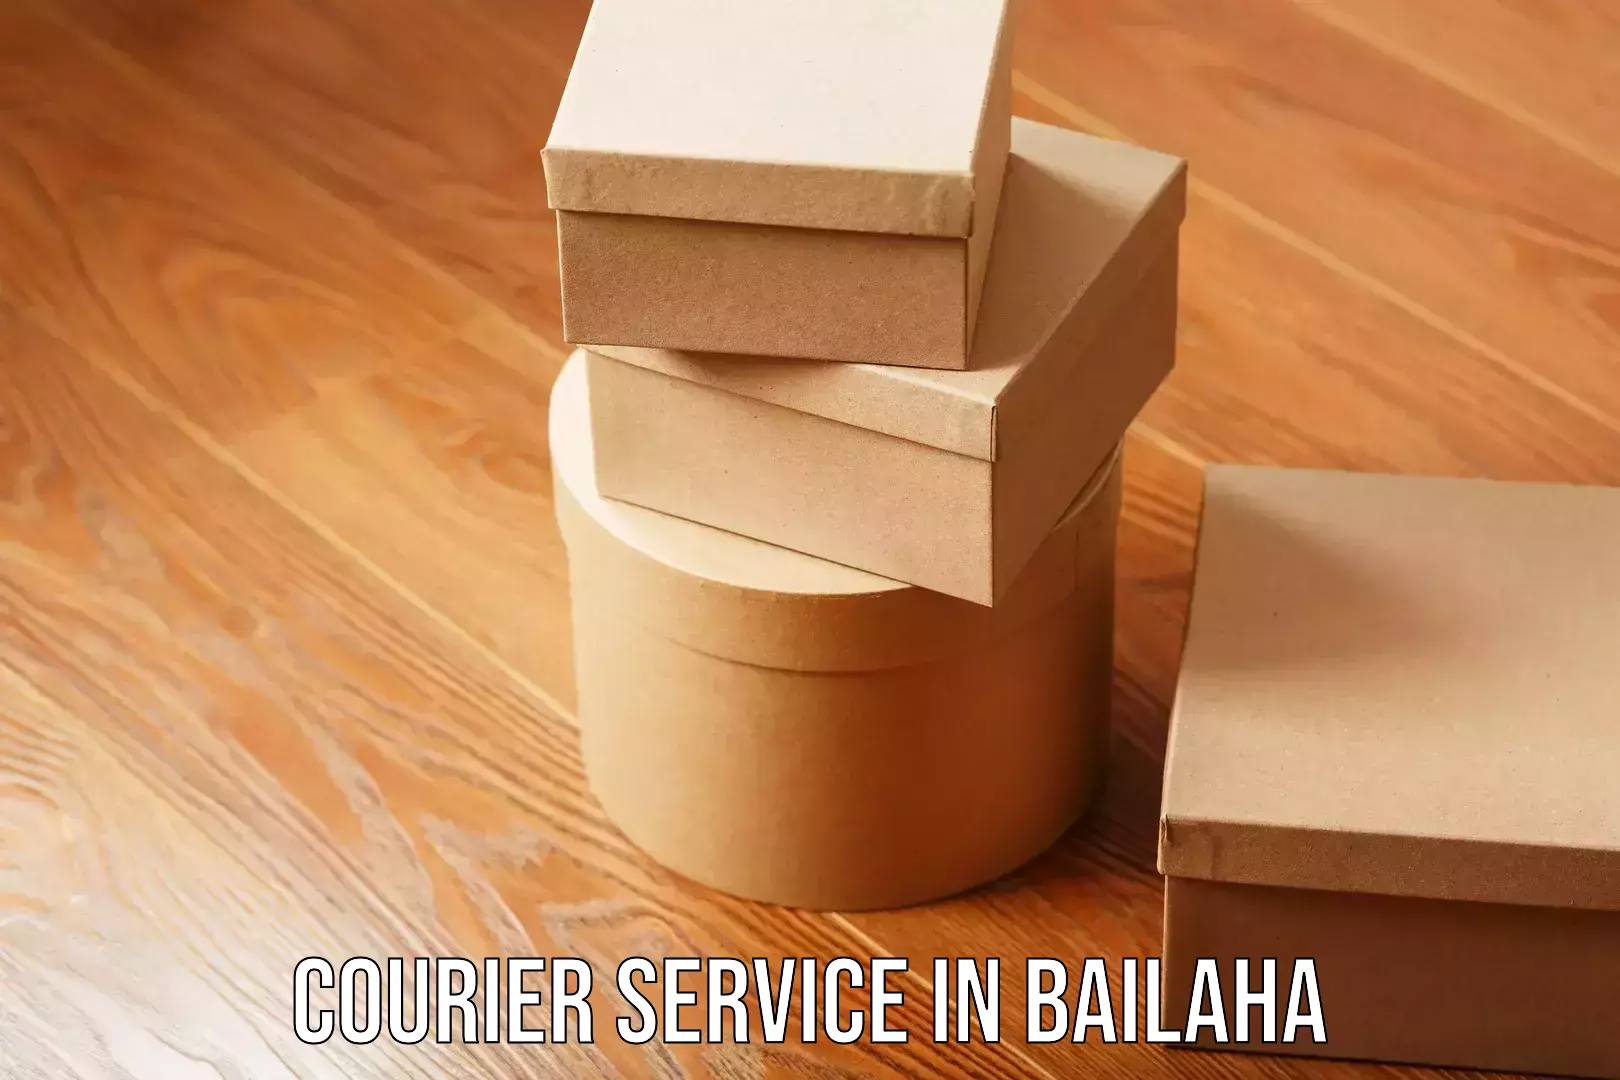 Overnight delivery services in Bailaha